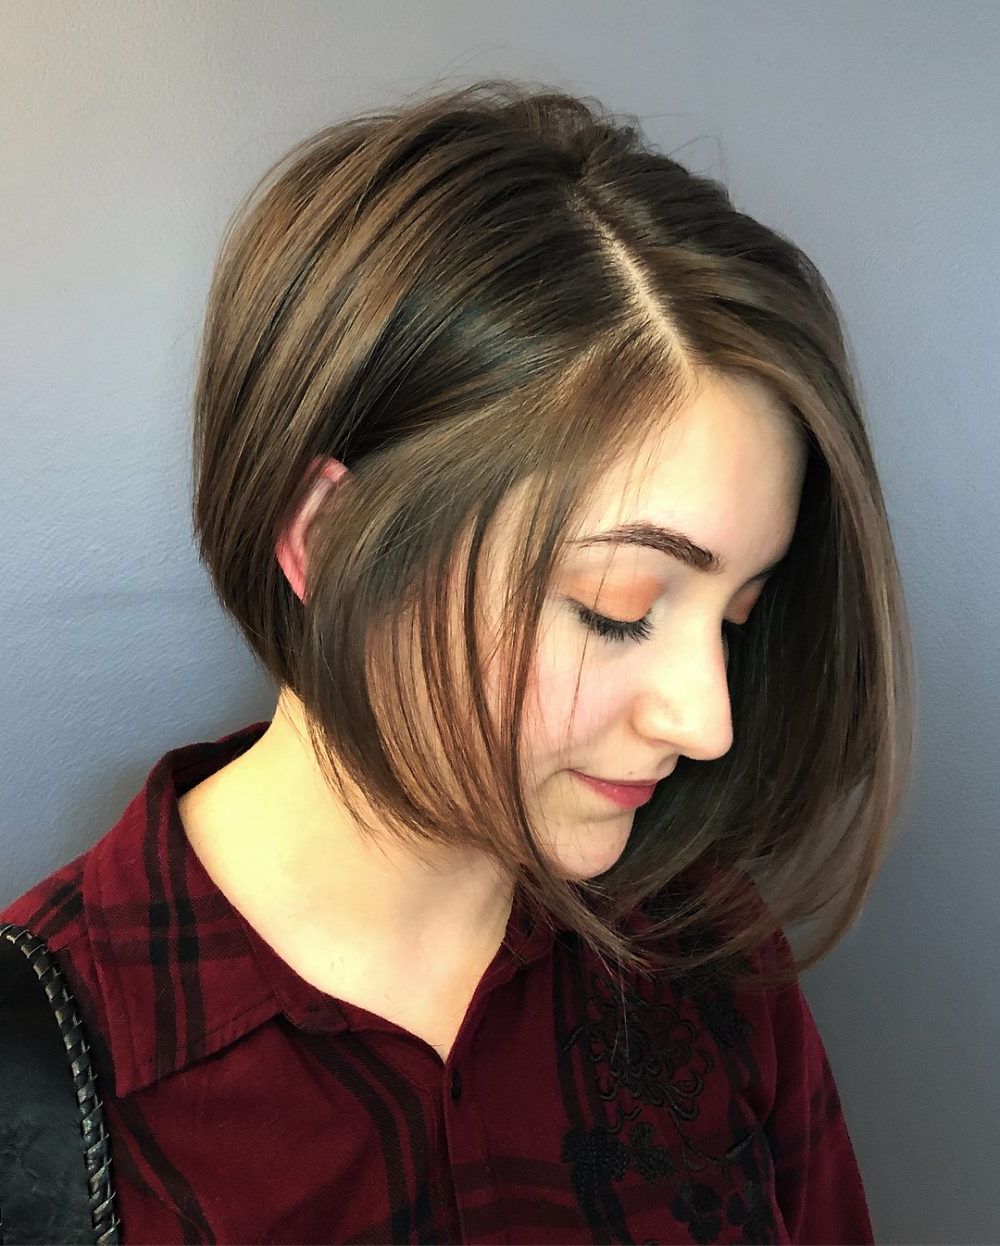 33 Flattering Short Hairstyles For Round Faces In 2018 With Short Hairstyles Swept Off The Face (View 12 of 25)